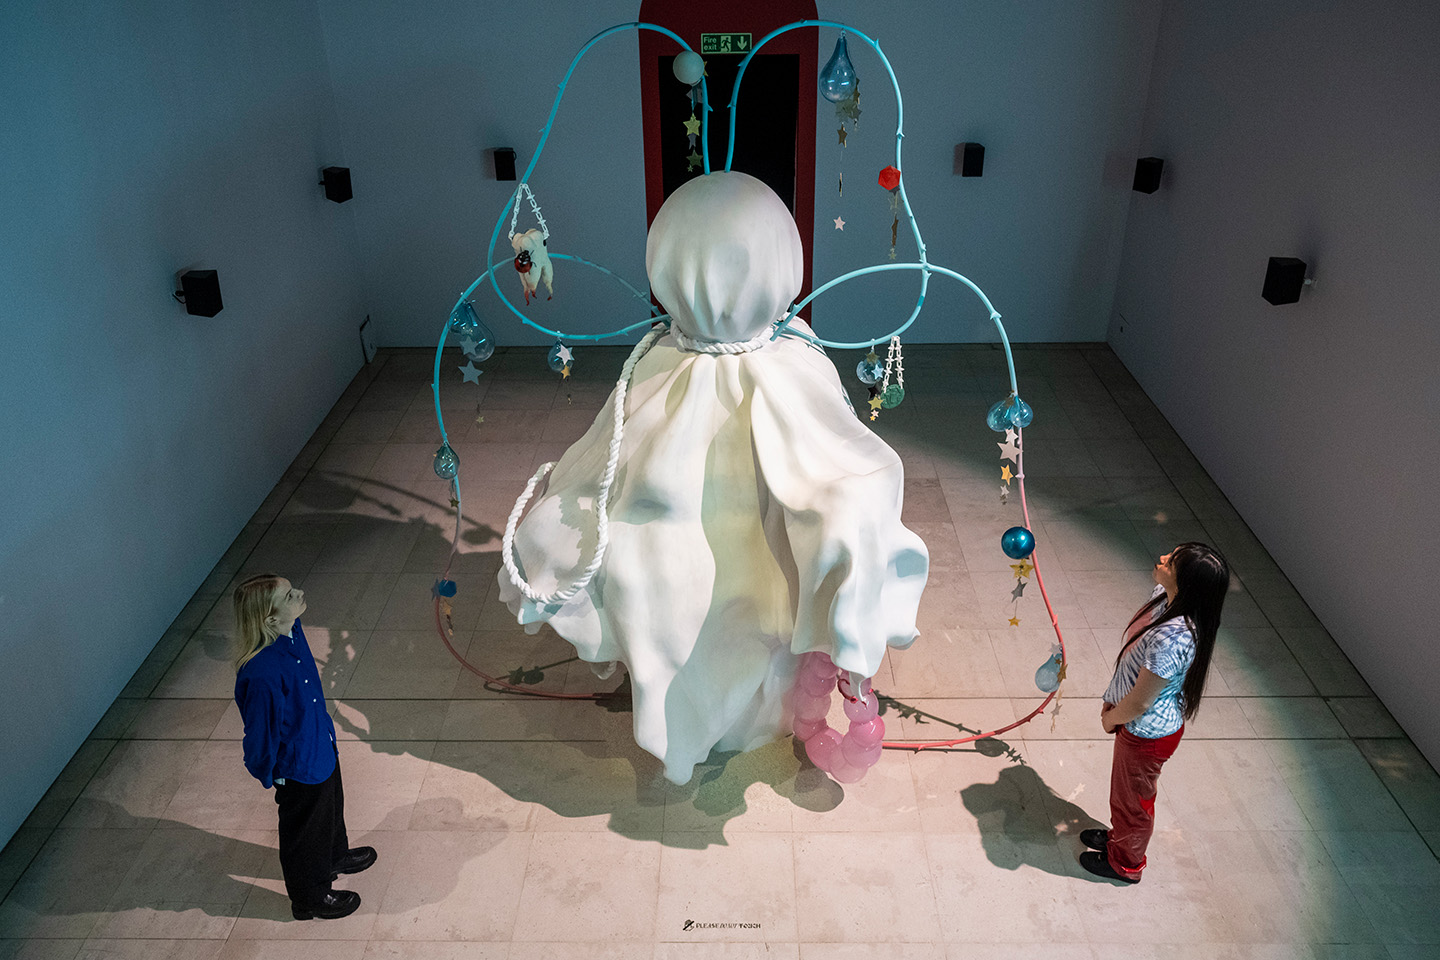 Installation view of Tai Shani's The Neon Heiroglyph, 2021, shows a large ghost like sculpture tied down with ropes